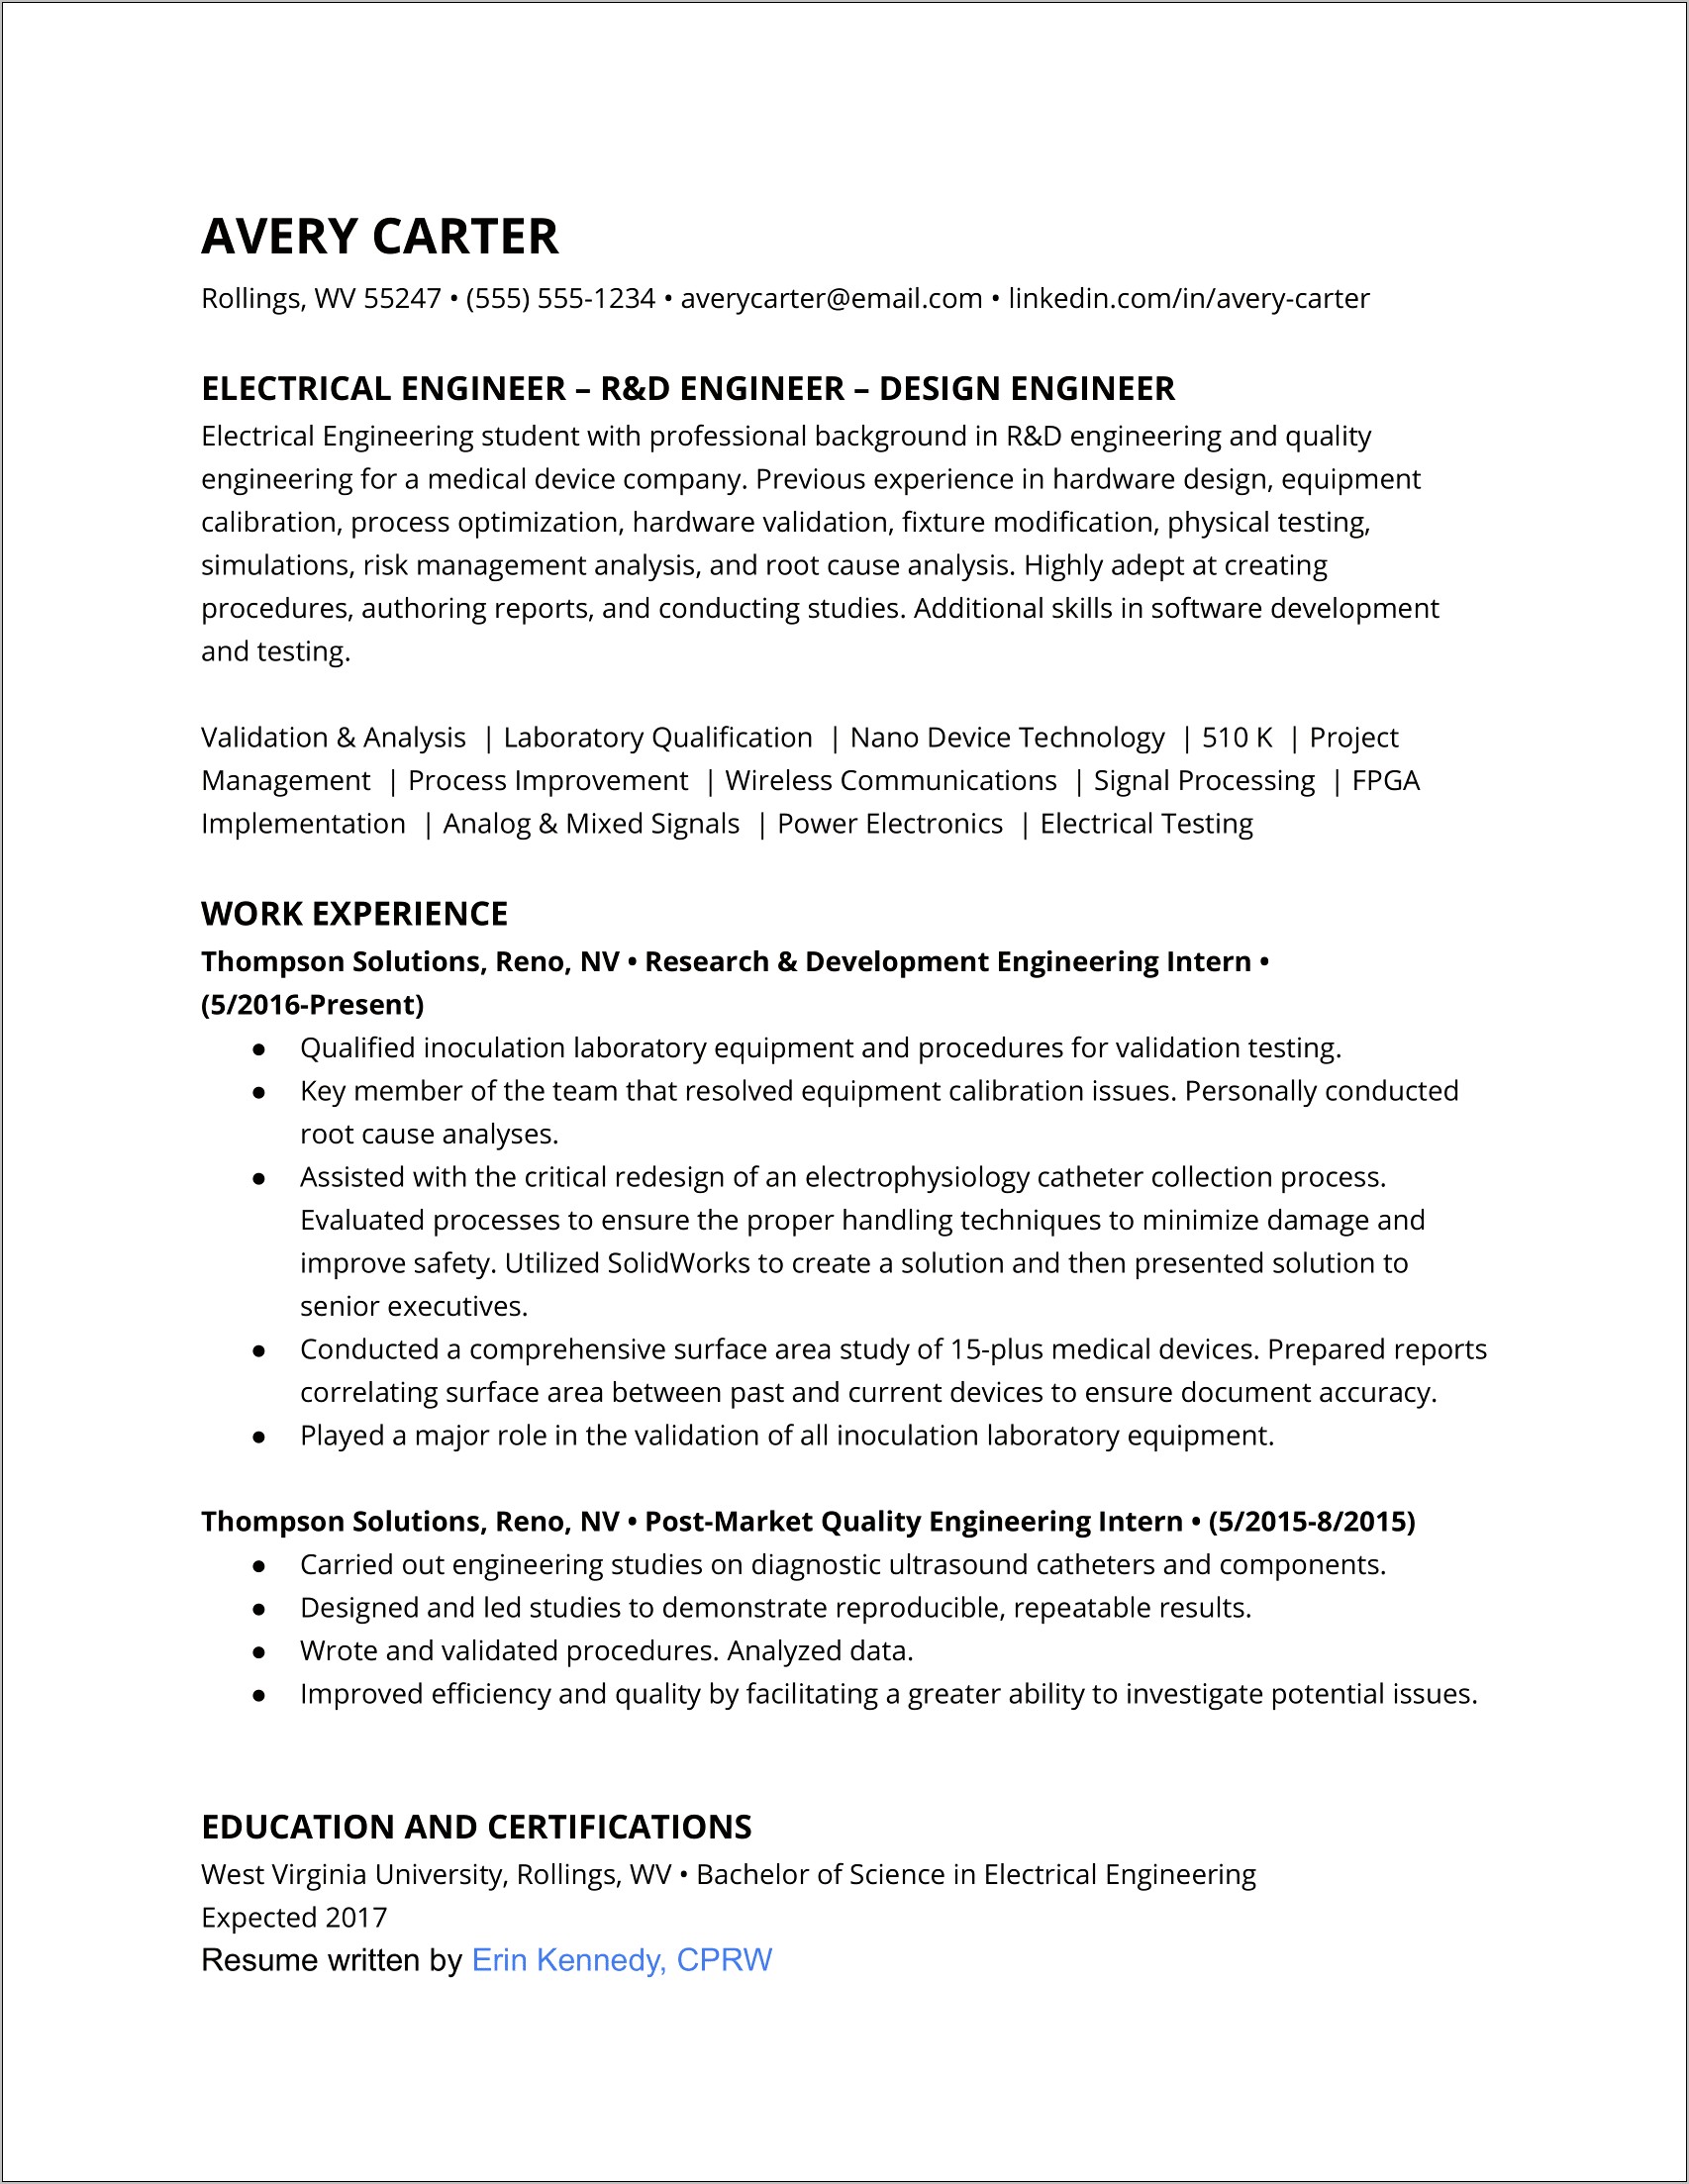 Entry Level Electrical Engineer Resume Examples